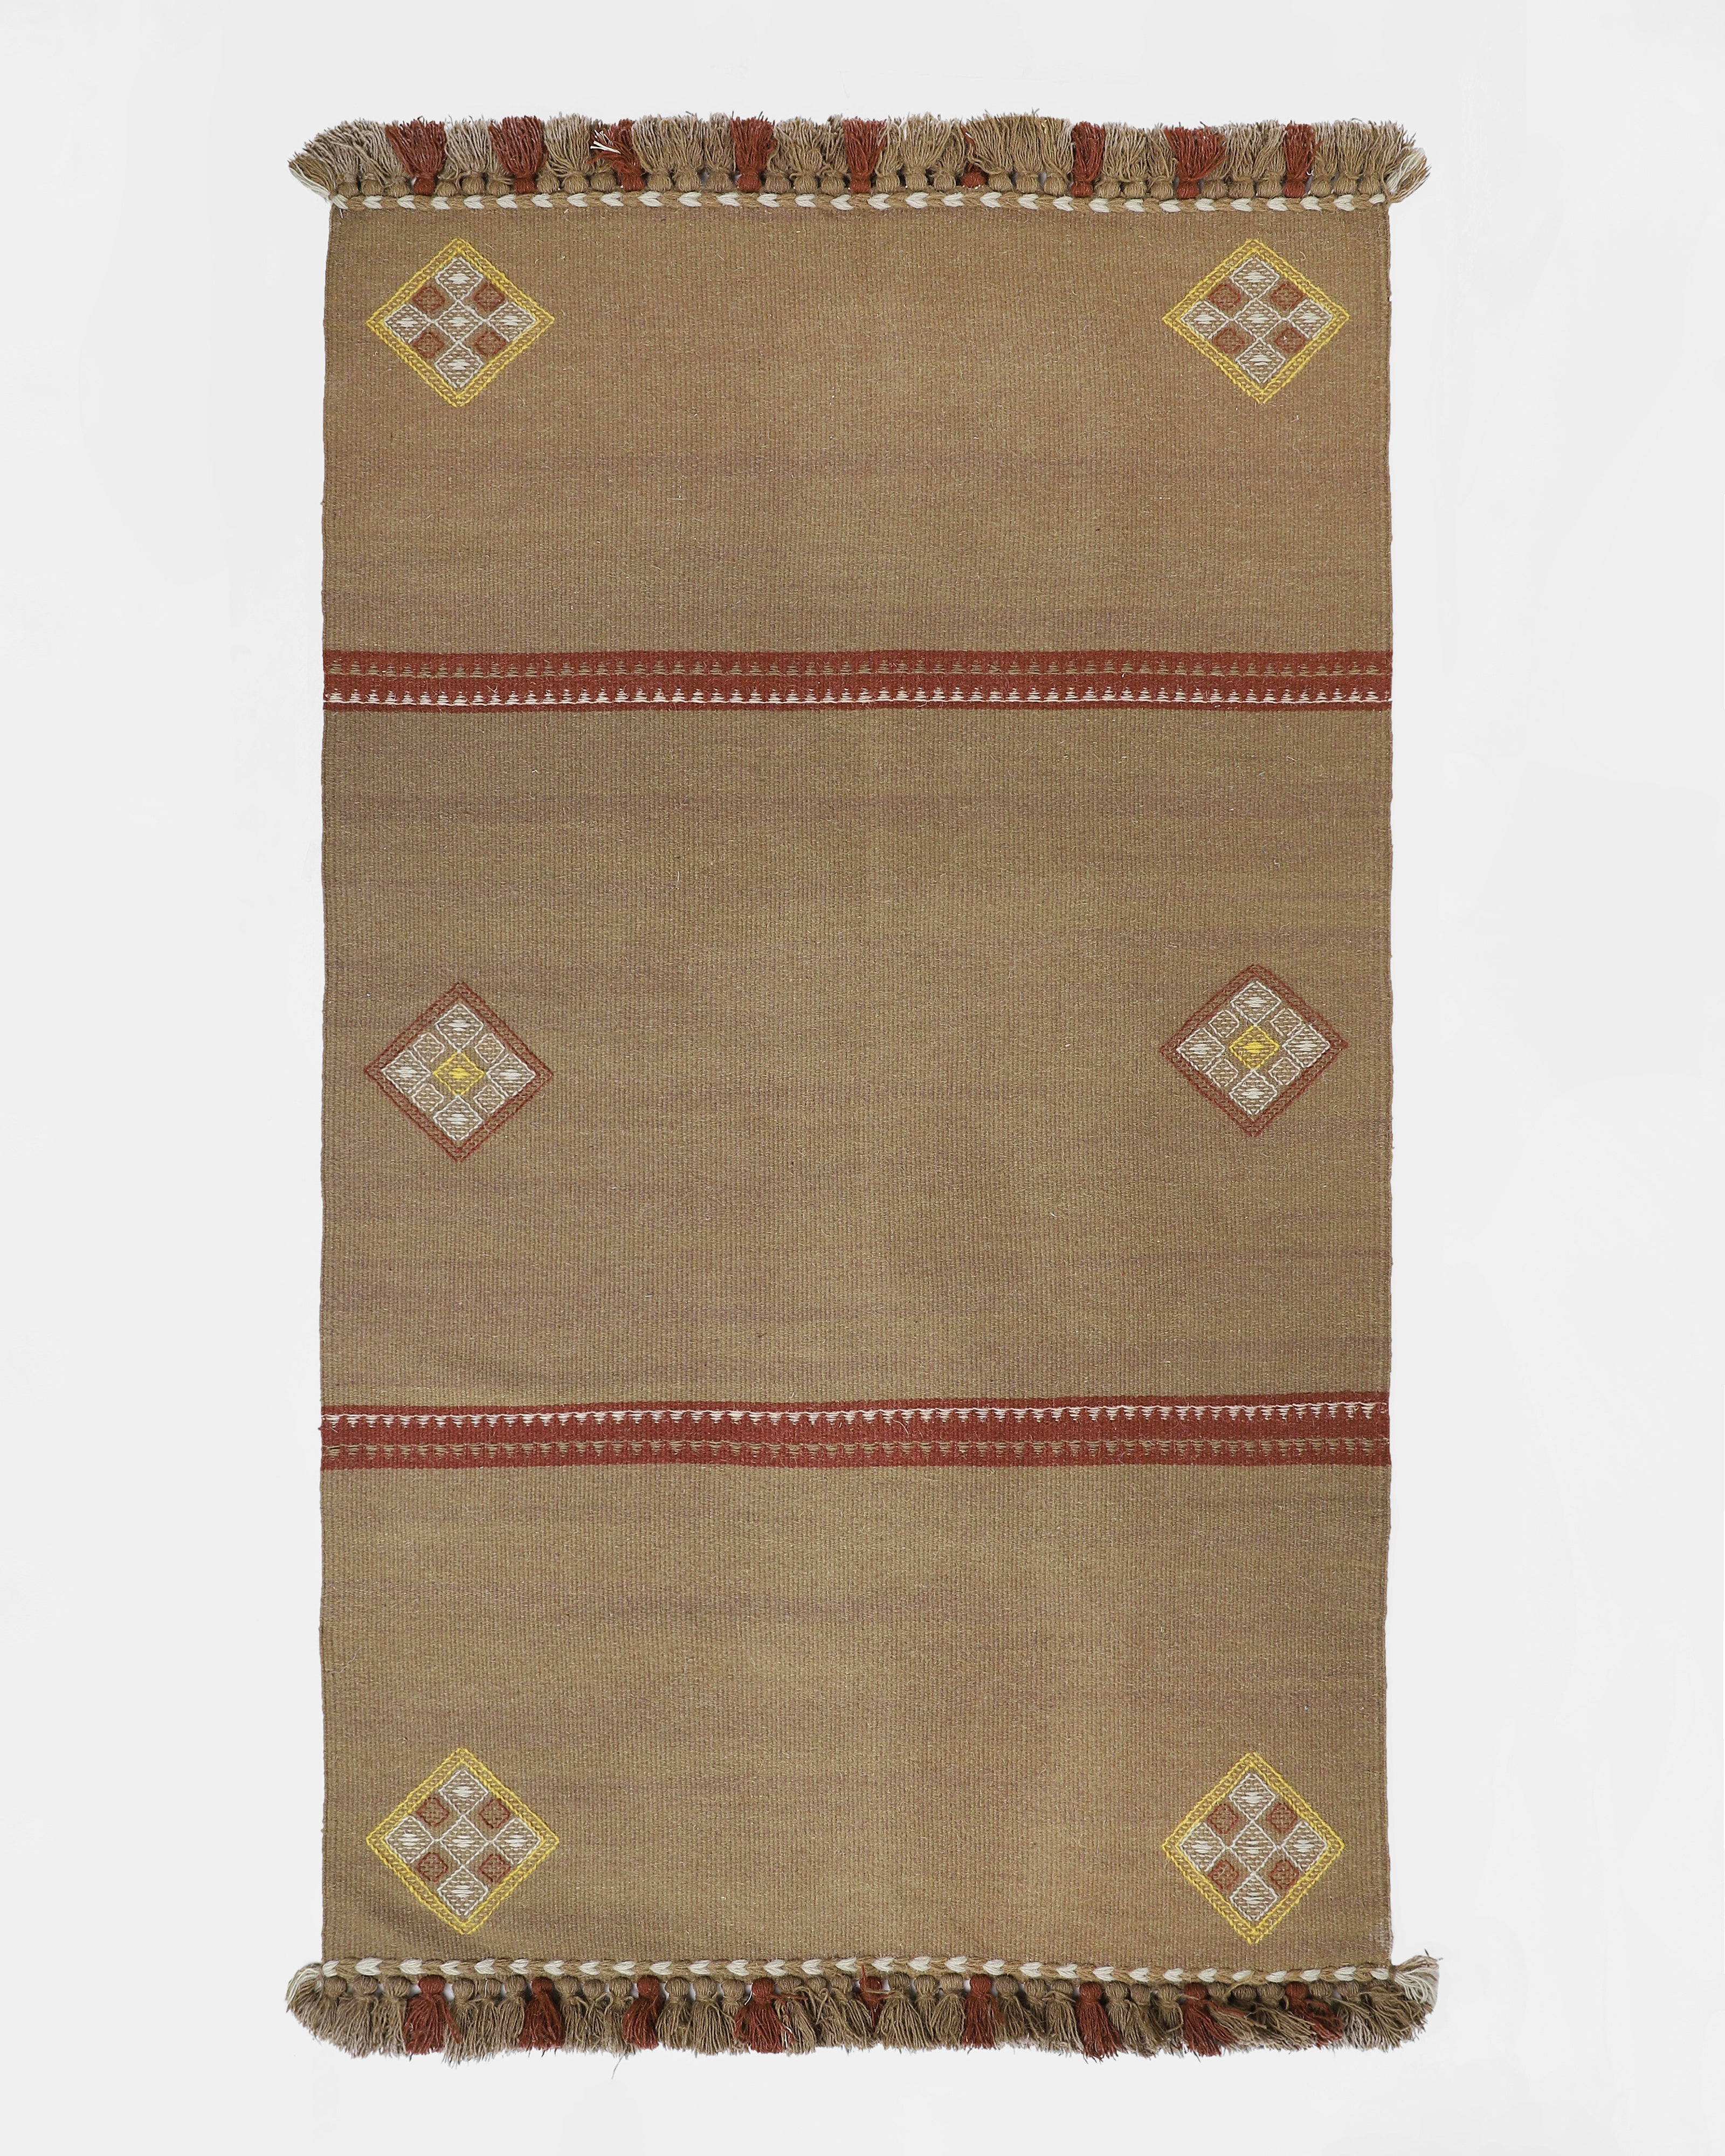 Silaah Extra Weft Cotton Wool Rug